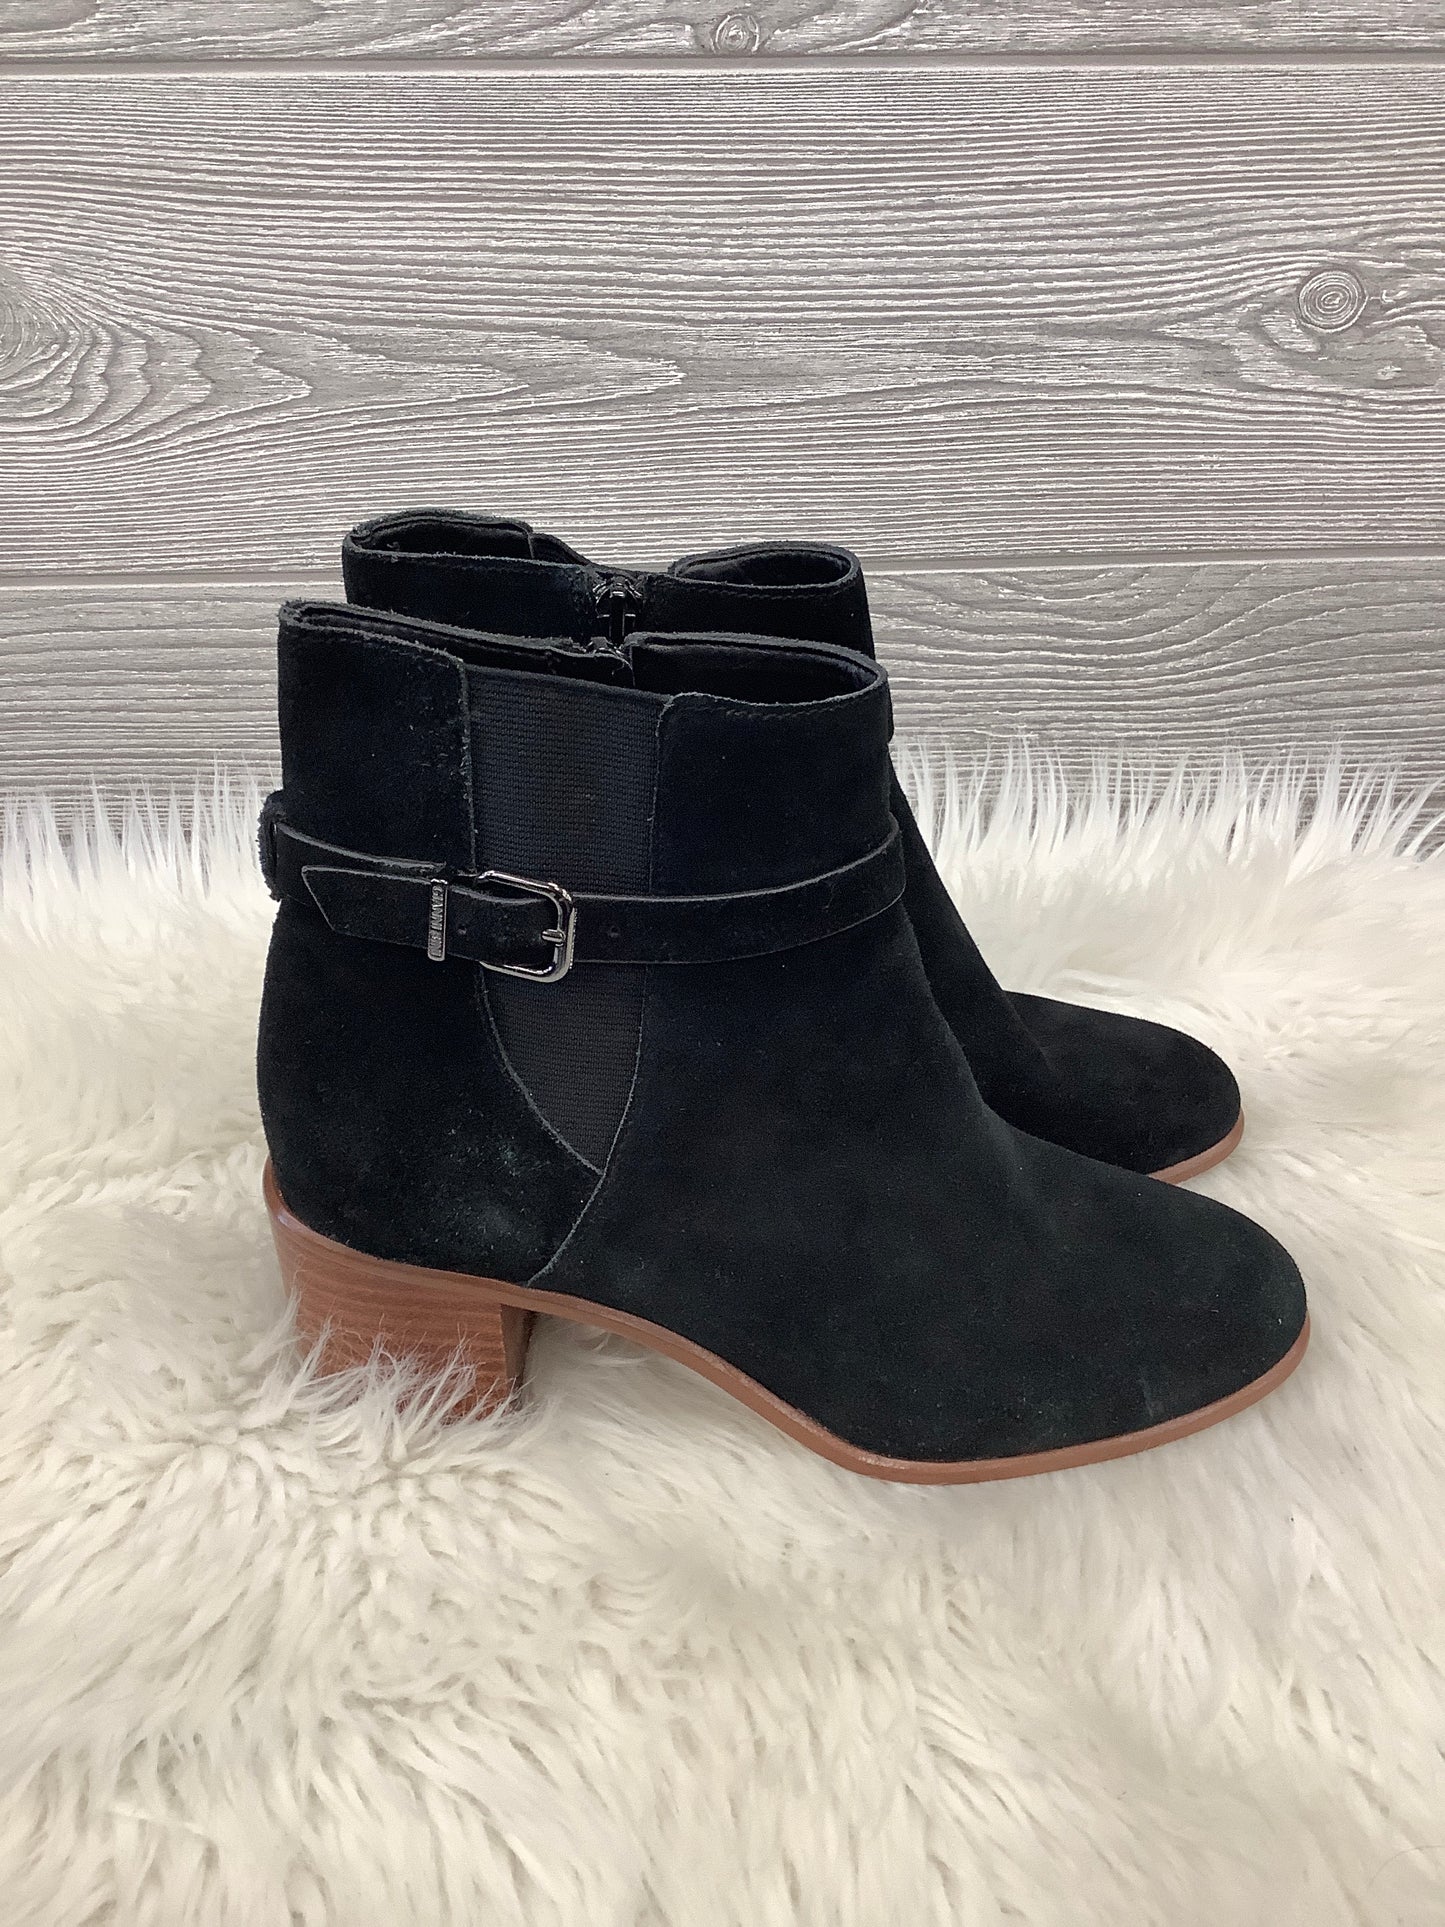 Boots Ankle Heels By Gianni Bini  Size: 9